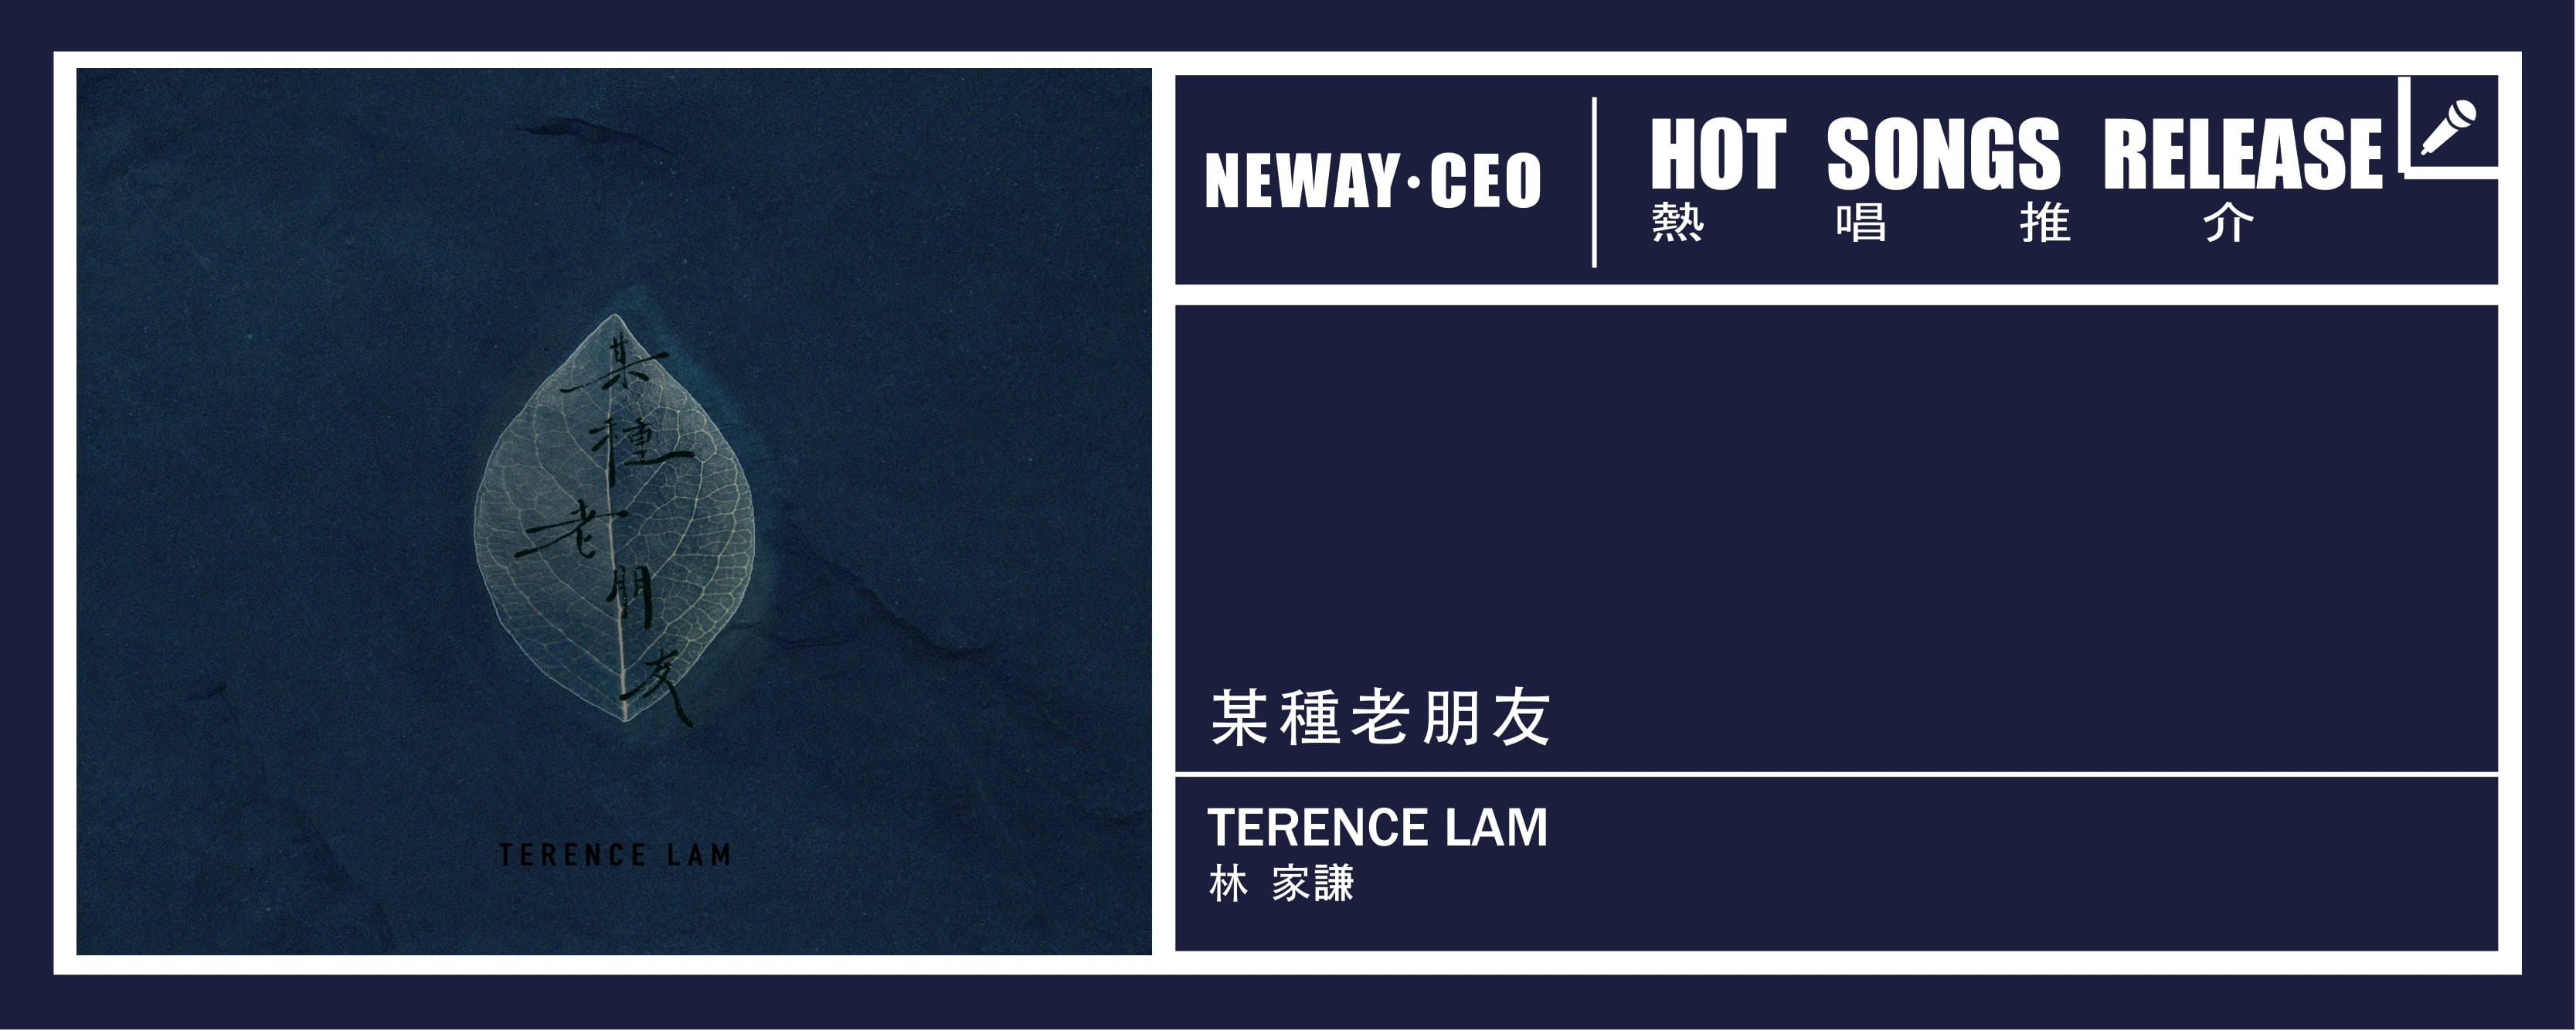 Neway New Release - TERENCE LAM